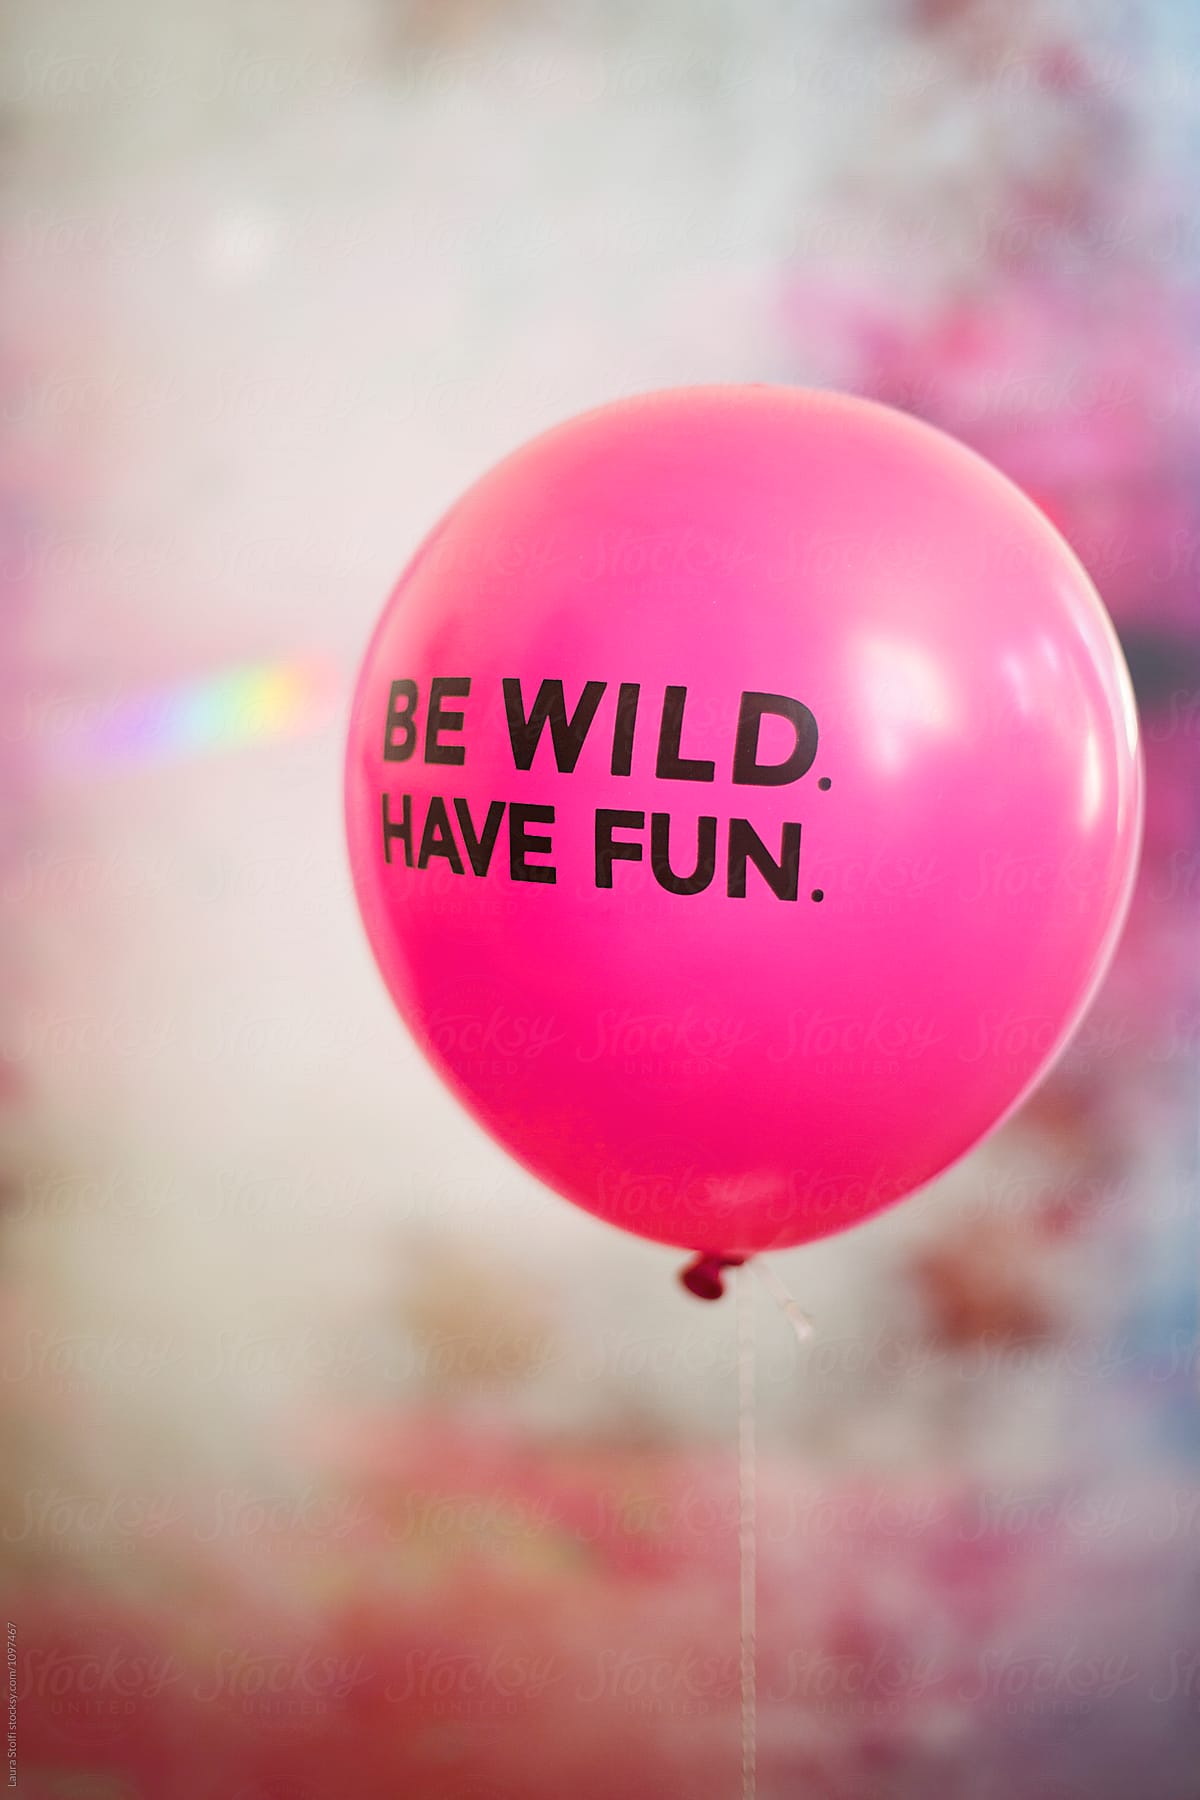 Words be wild, have fun on pink flying balloon